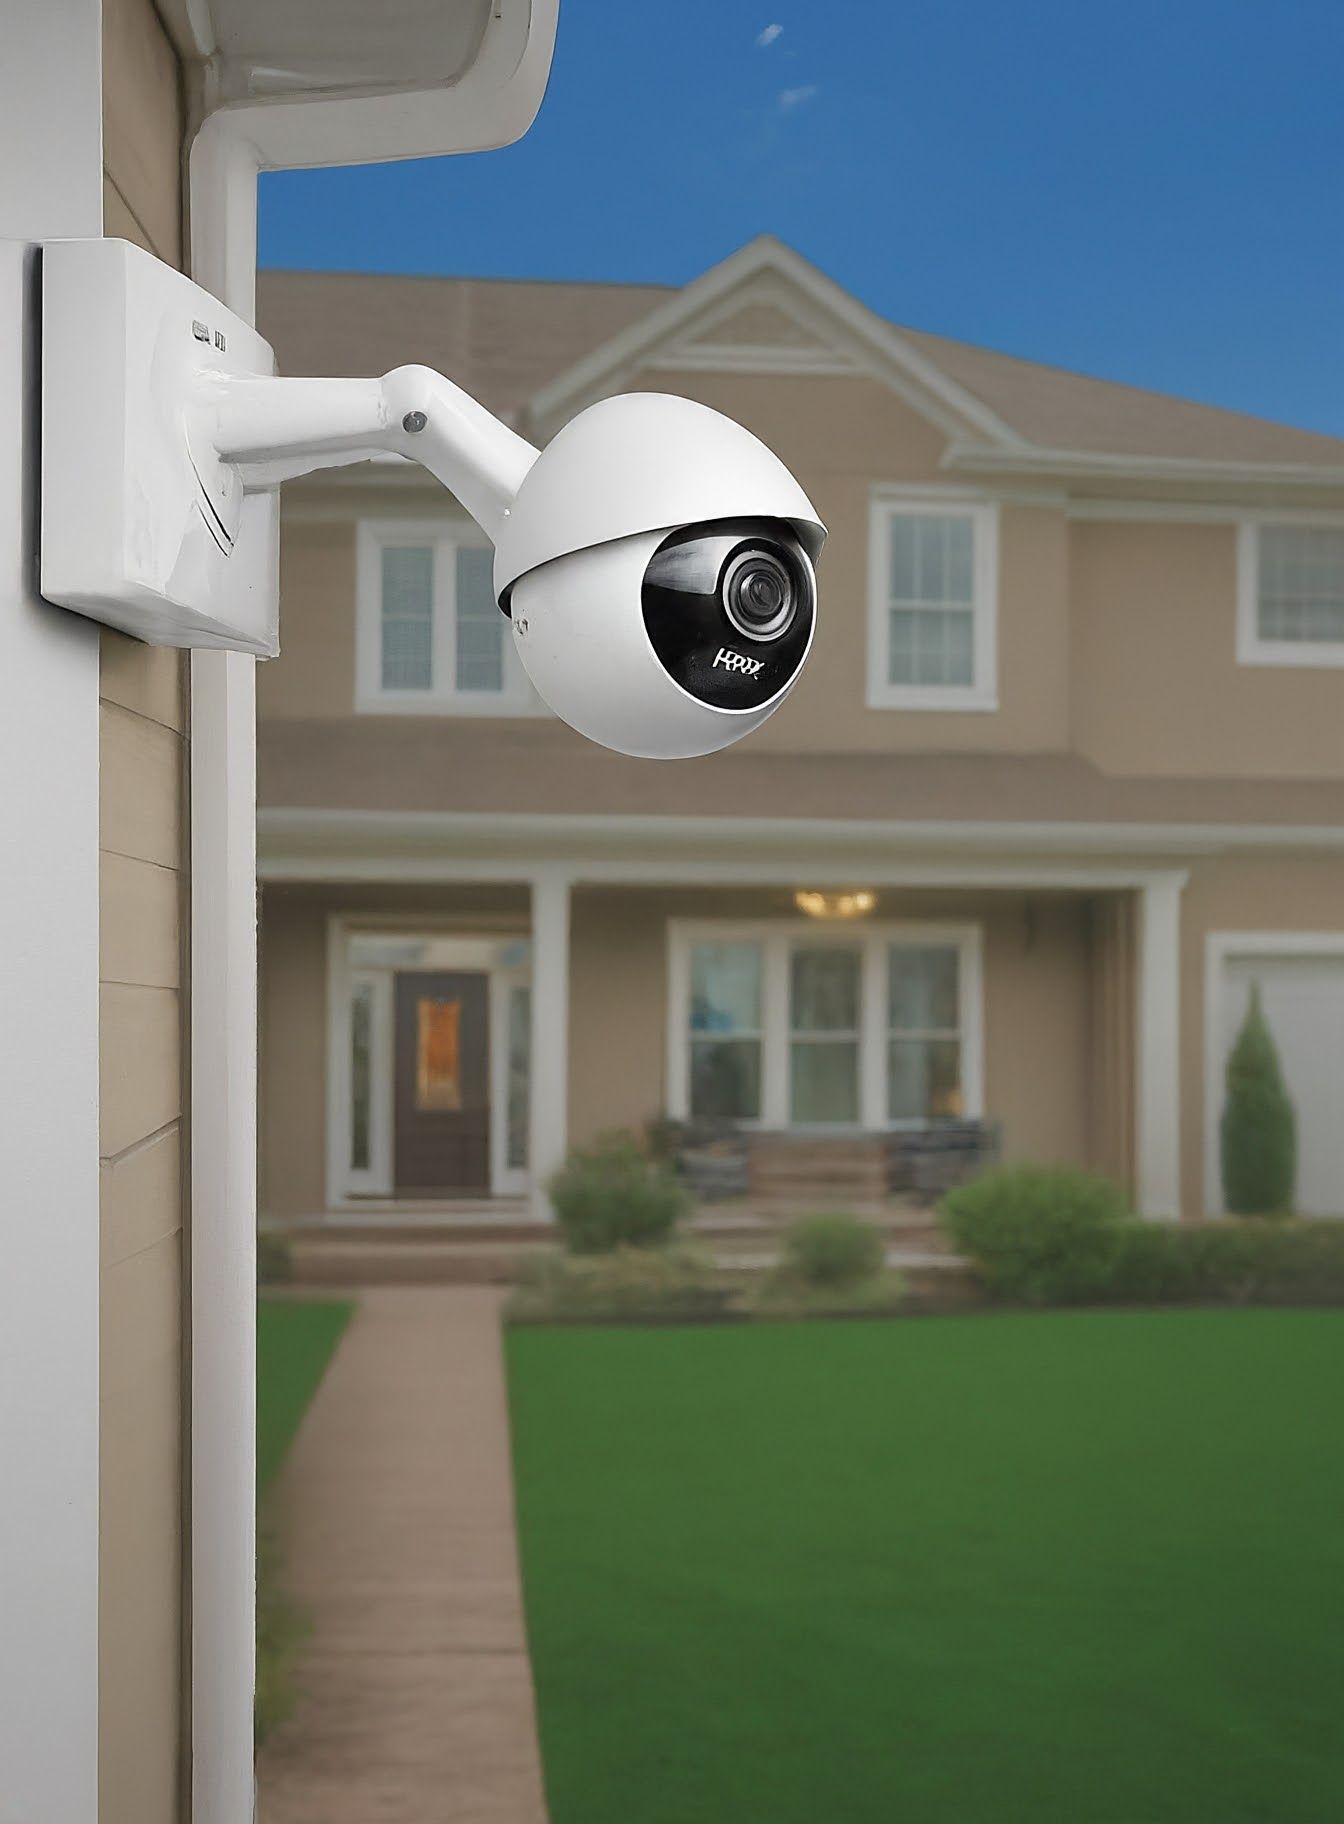 Example 5 of PMAX's AI Image Generator with a security camera outside a house